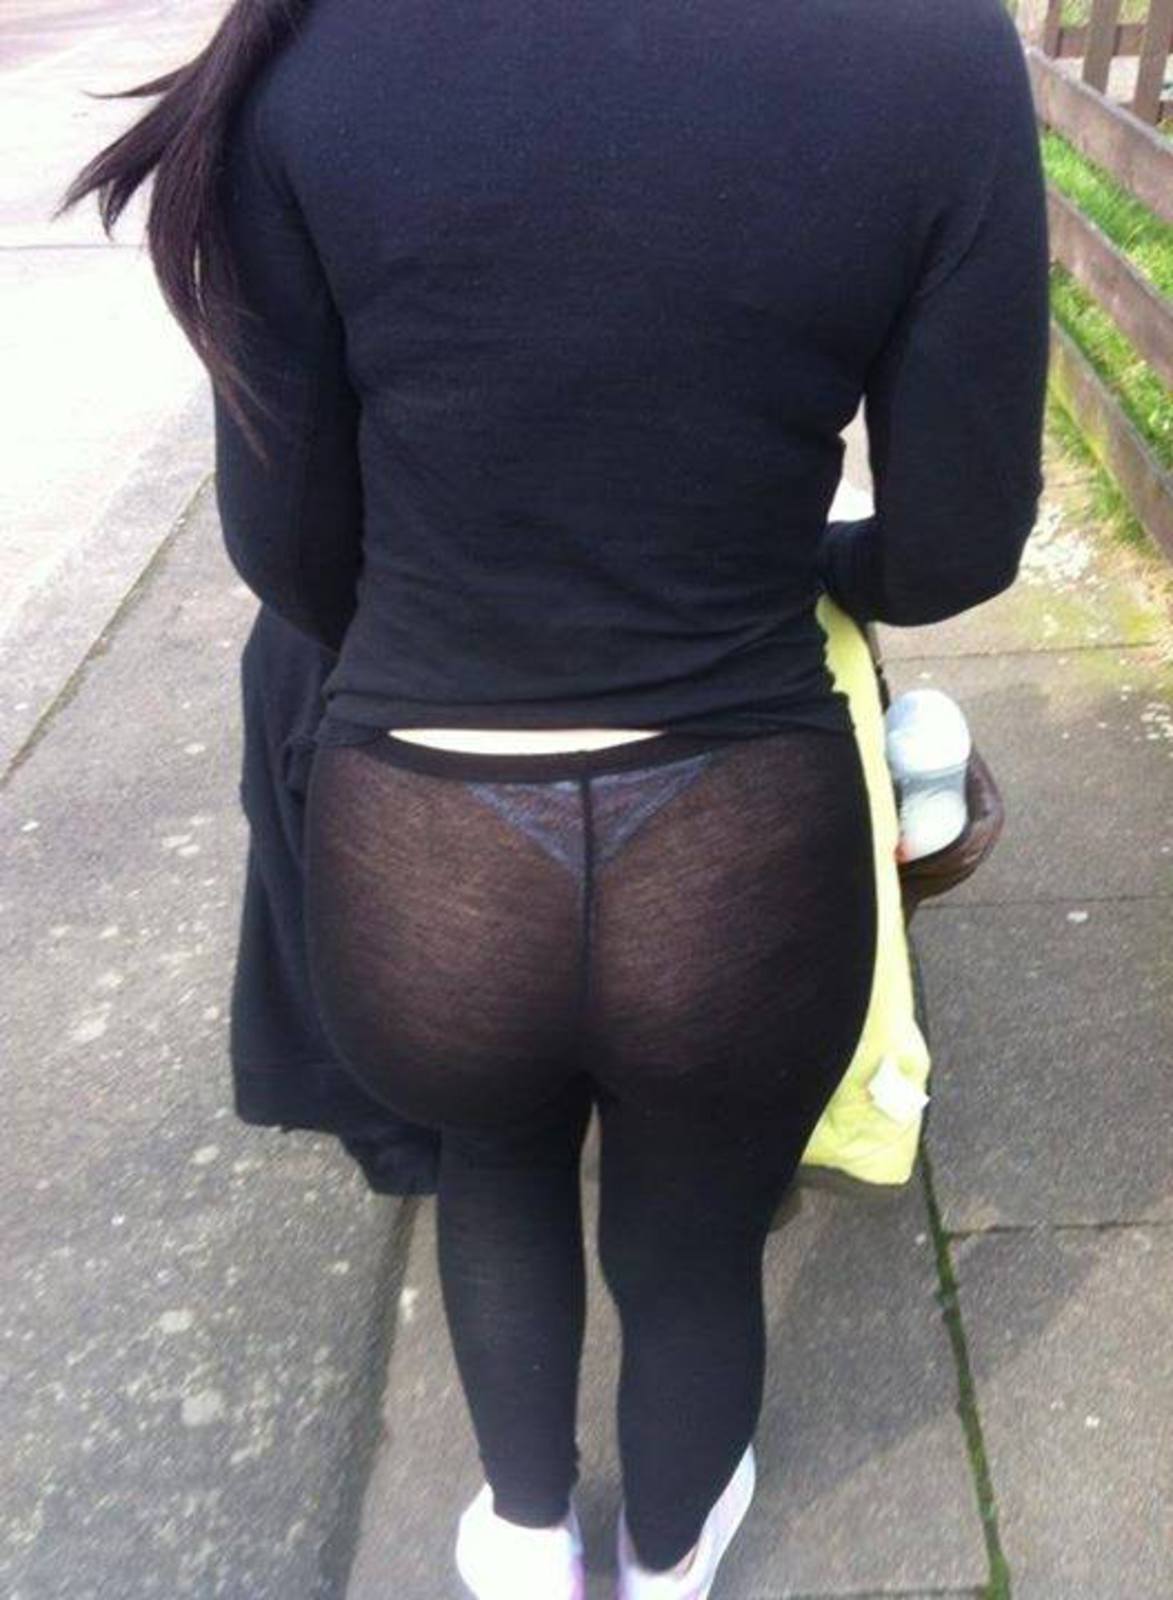 a man having sex with a woman #ass #bicycle #bigass #bigbooty #bike #booty #leggings #pawg #seethrough #seethru #sexyass #spandex #spandexass #thick #tight #tights #whooty #yogapants